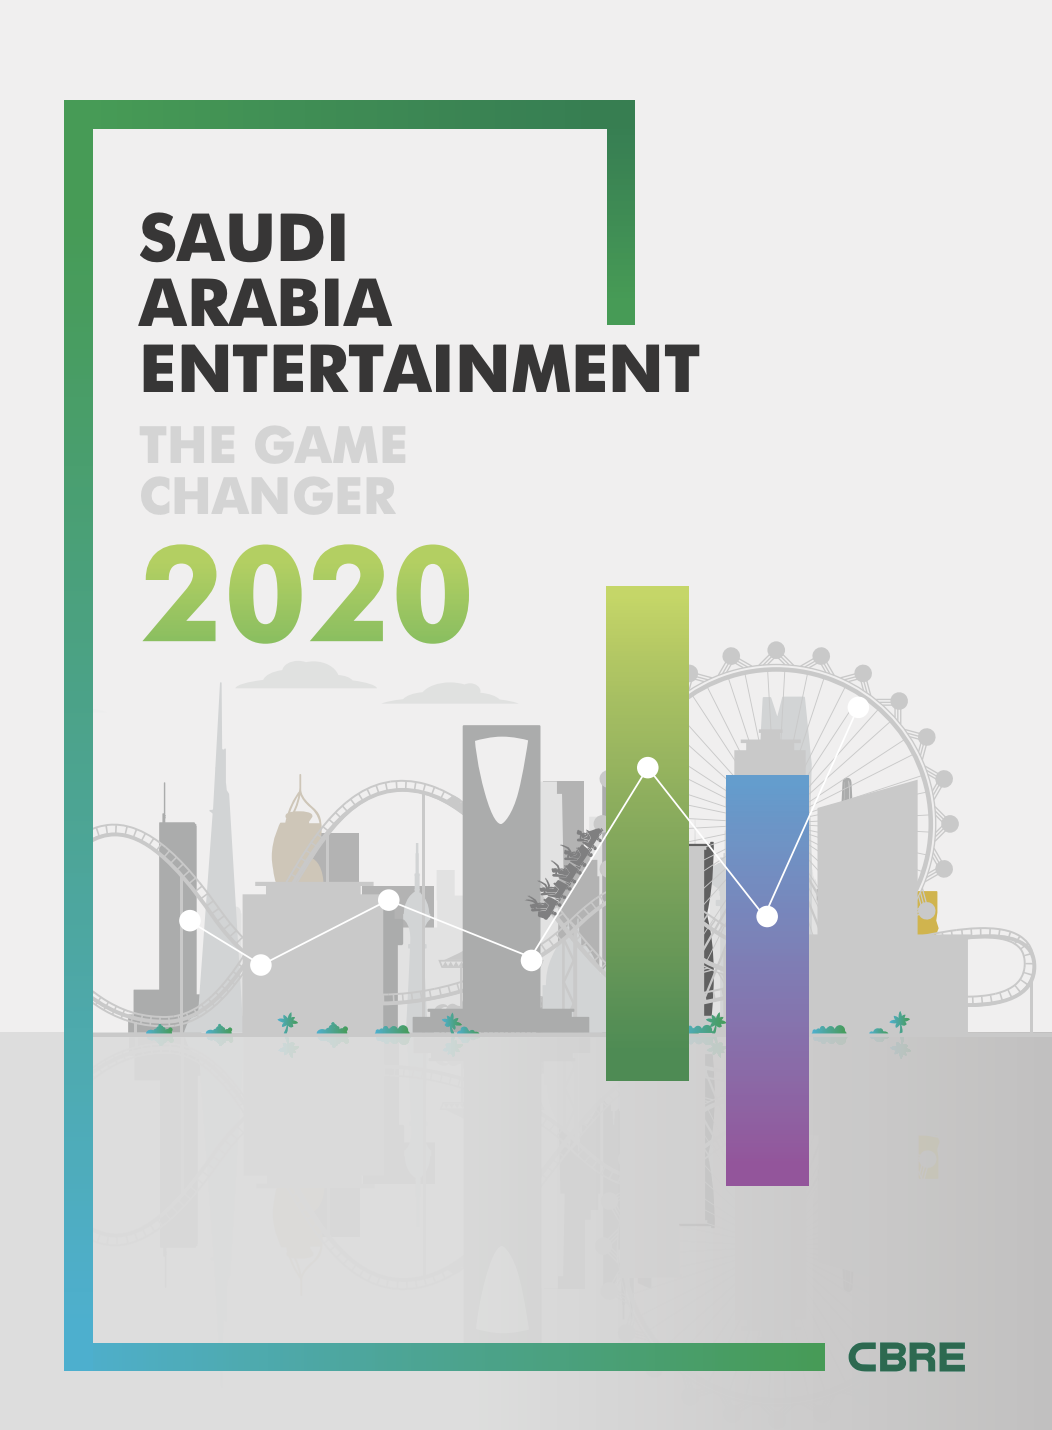 CBRE's new comprehensive look at Saudi Arabia's entertainment sector explores key milestones and developments as well as the impact on the real estate sector and development opportunities moving forward.